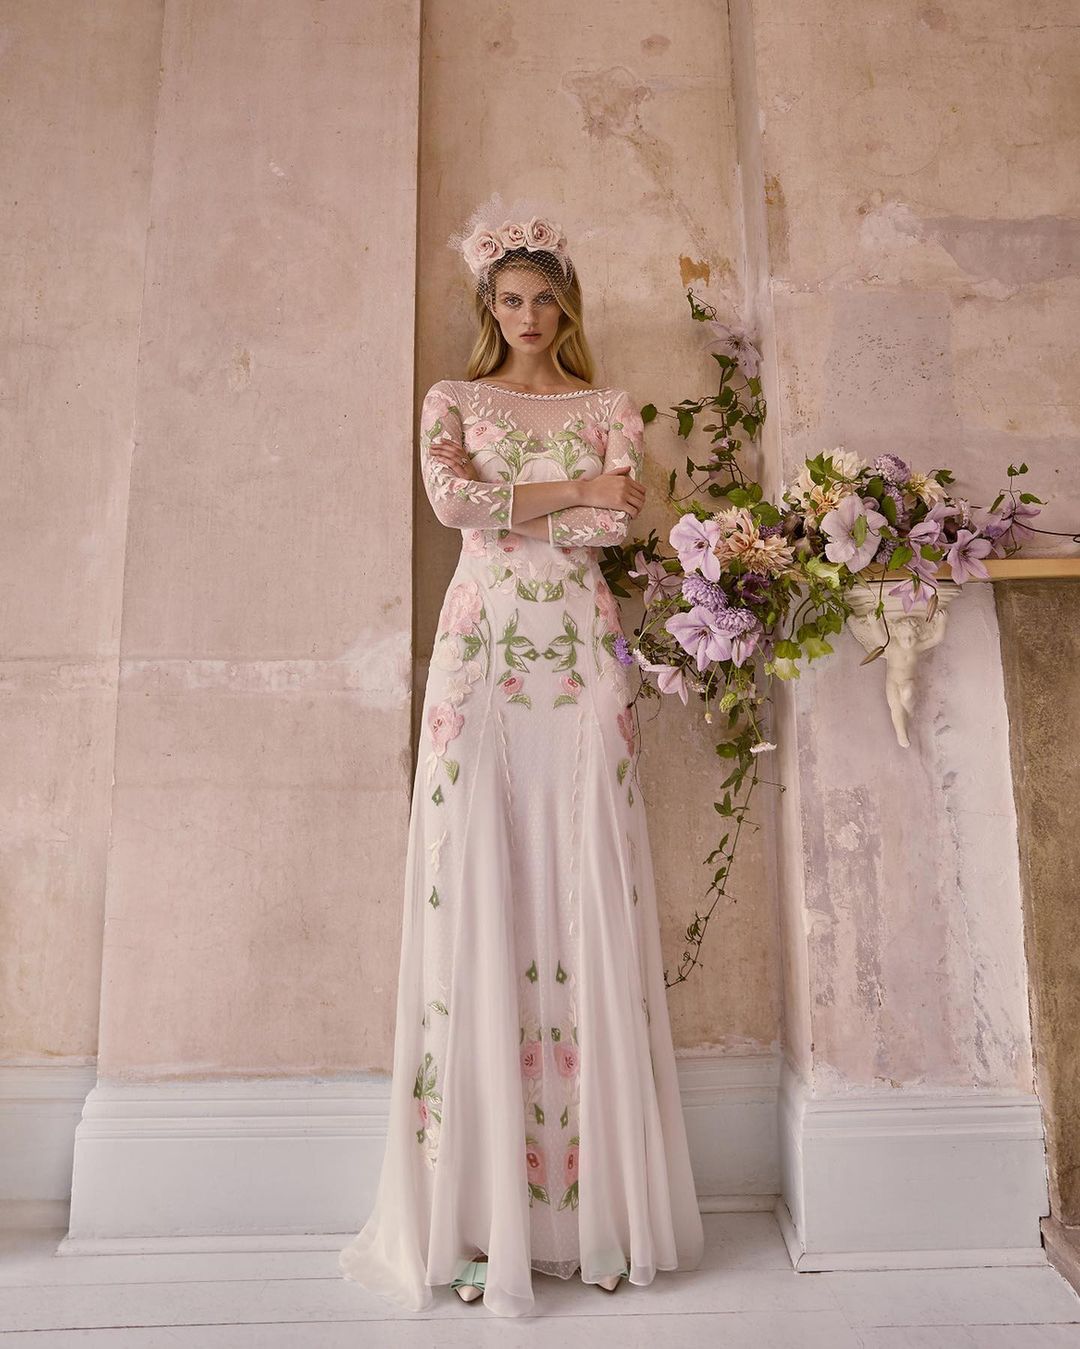 11 Floral Embroidered Wedding Dresses To Make A Statement Wedding Journal